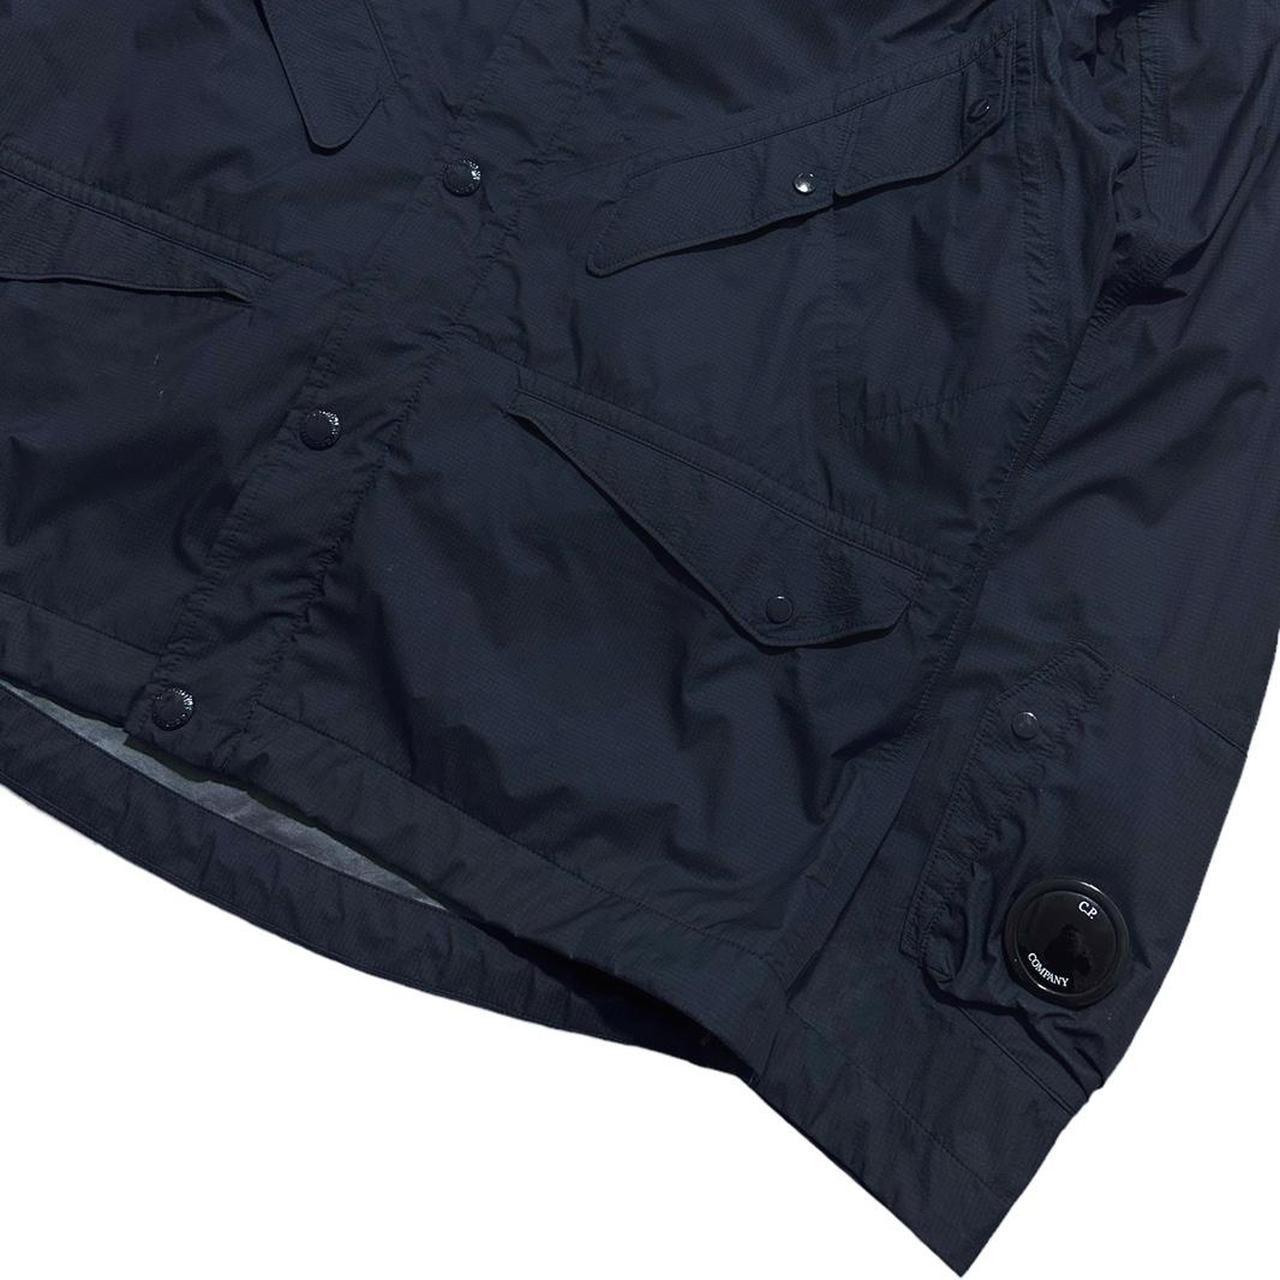 CP Company Navy Goggle Jacket - Known Source